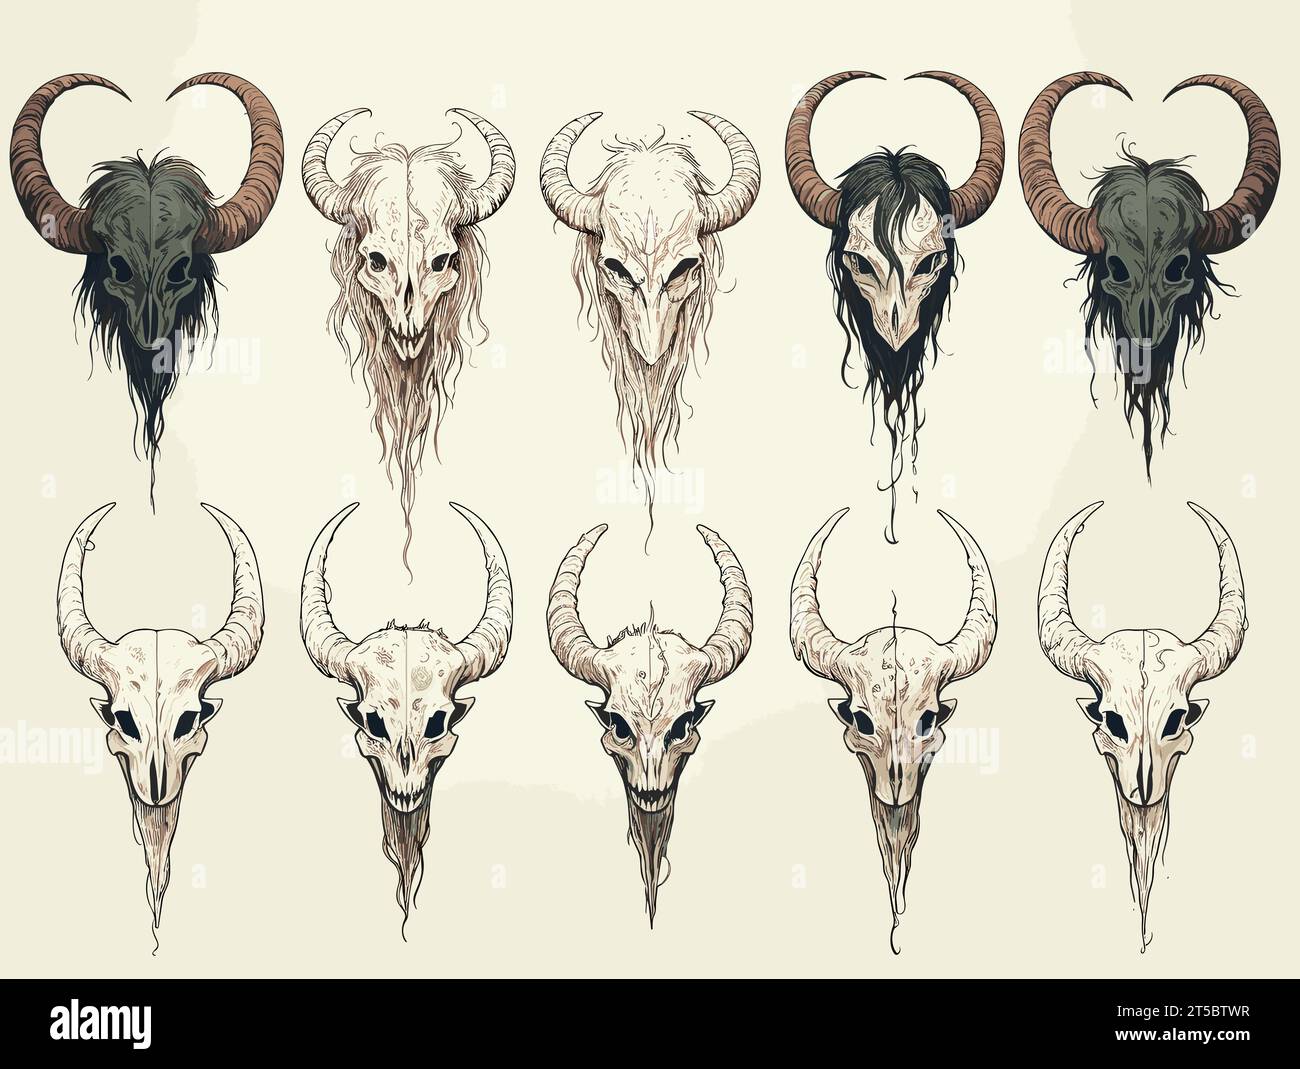 Drawing of 8 types of Satanic Goat Head horns Sheep Skull illustration separated, sweeping overdrawn lines. Stock Vector